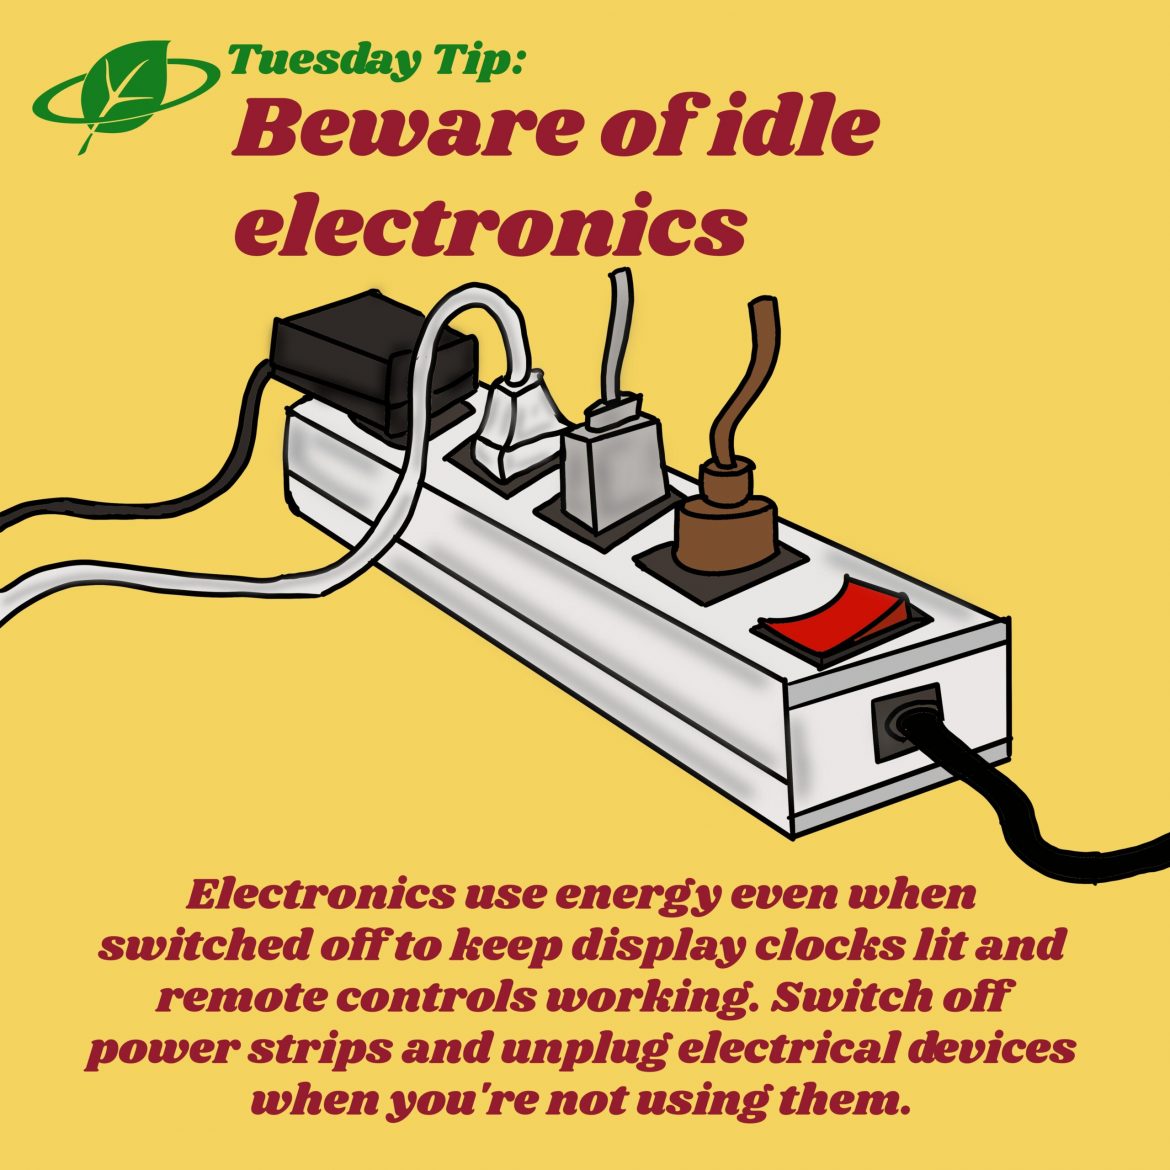 Beware of idle electronics | Tuesday Tip